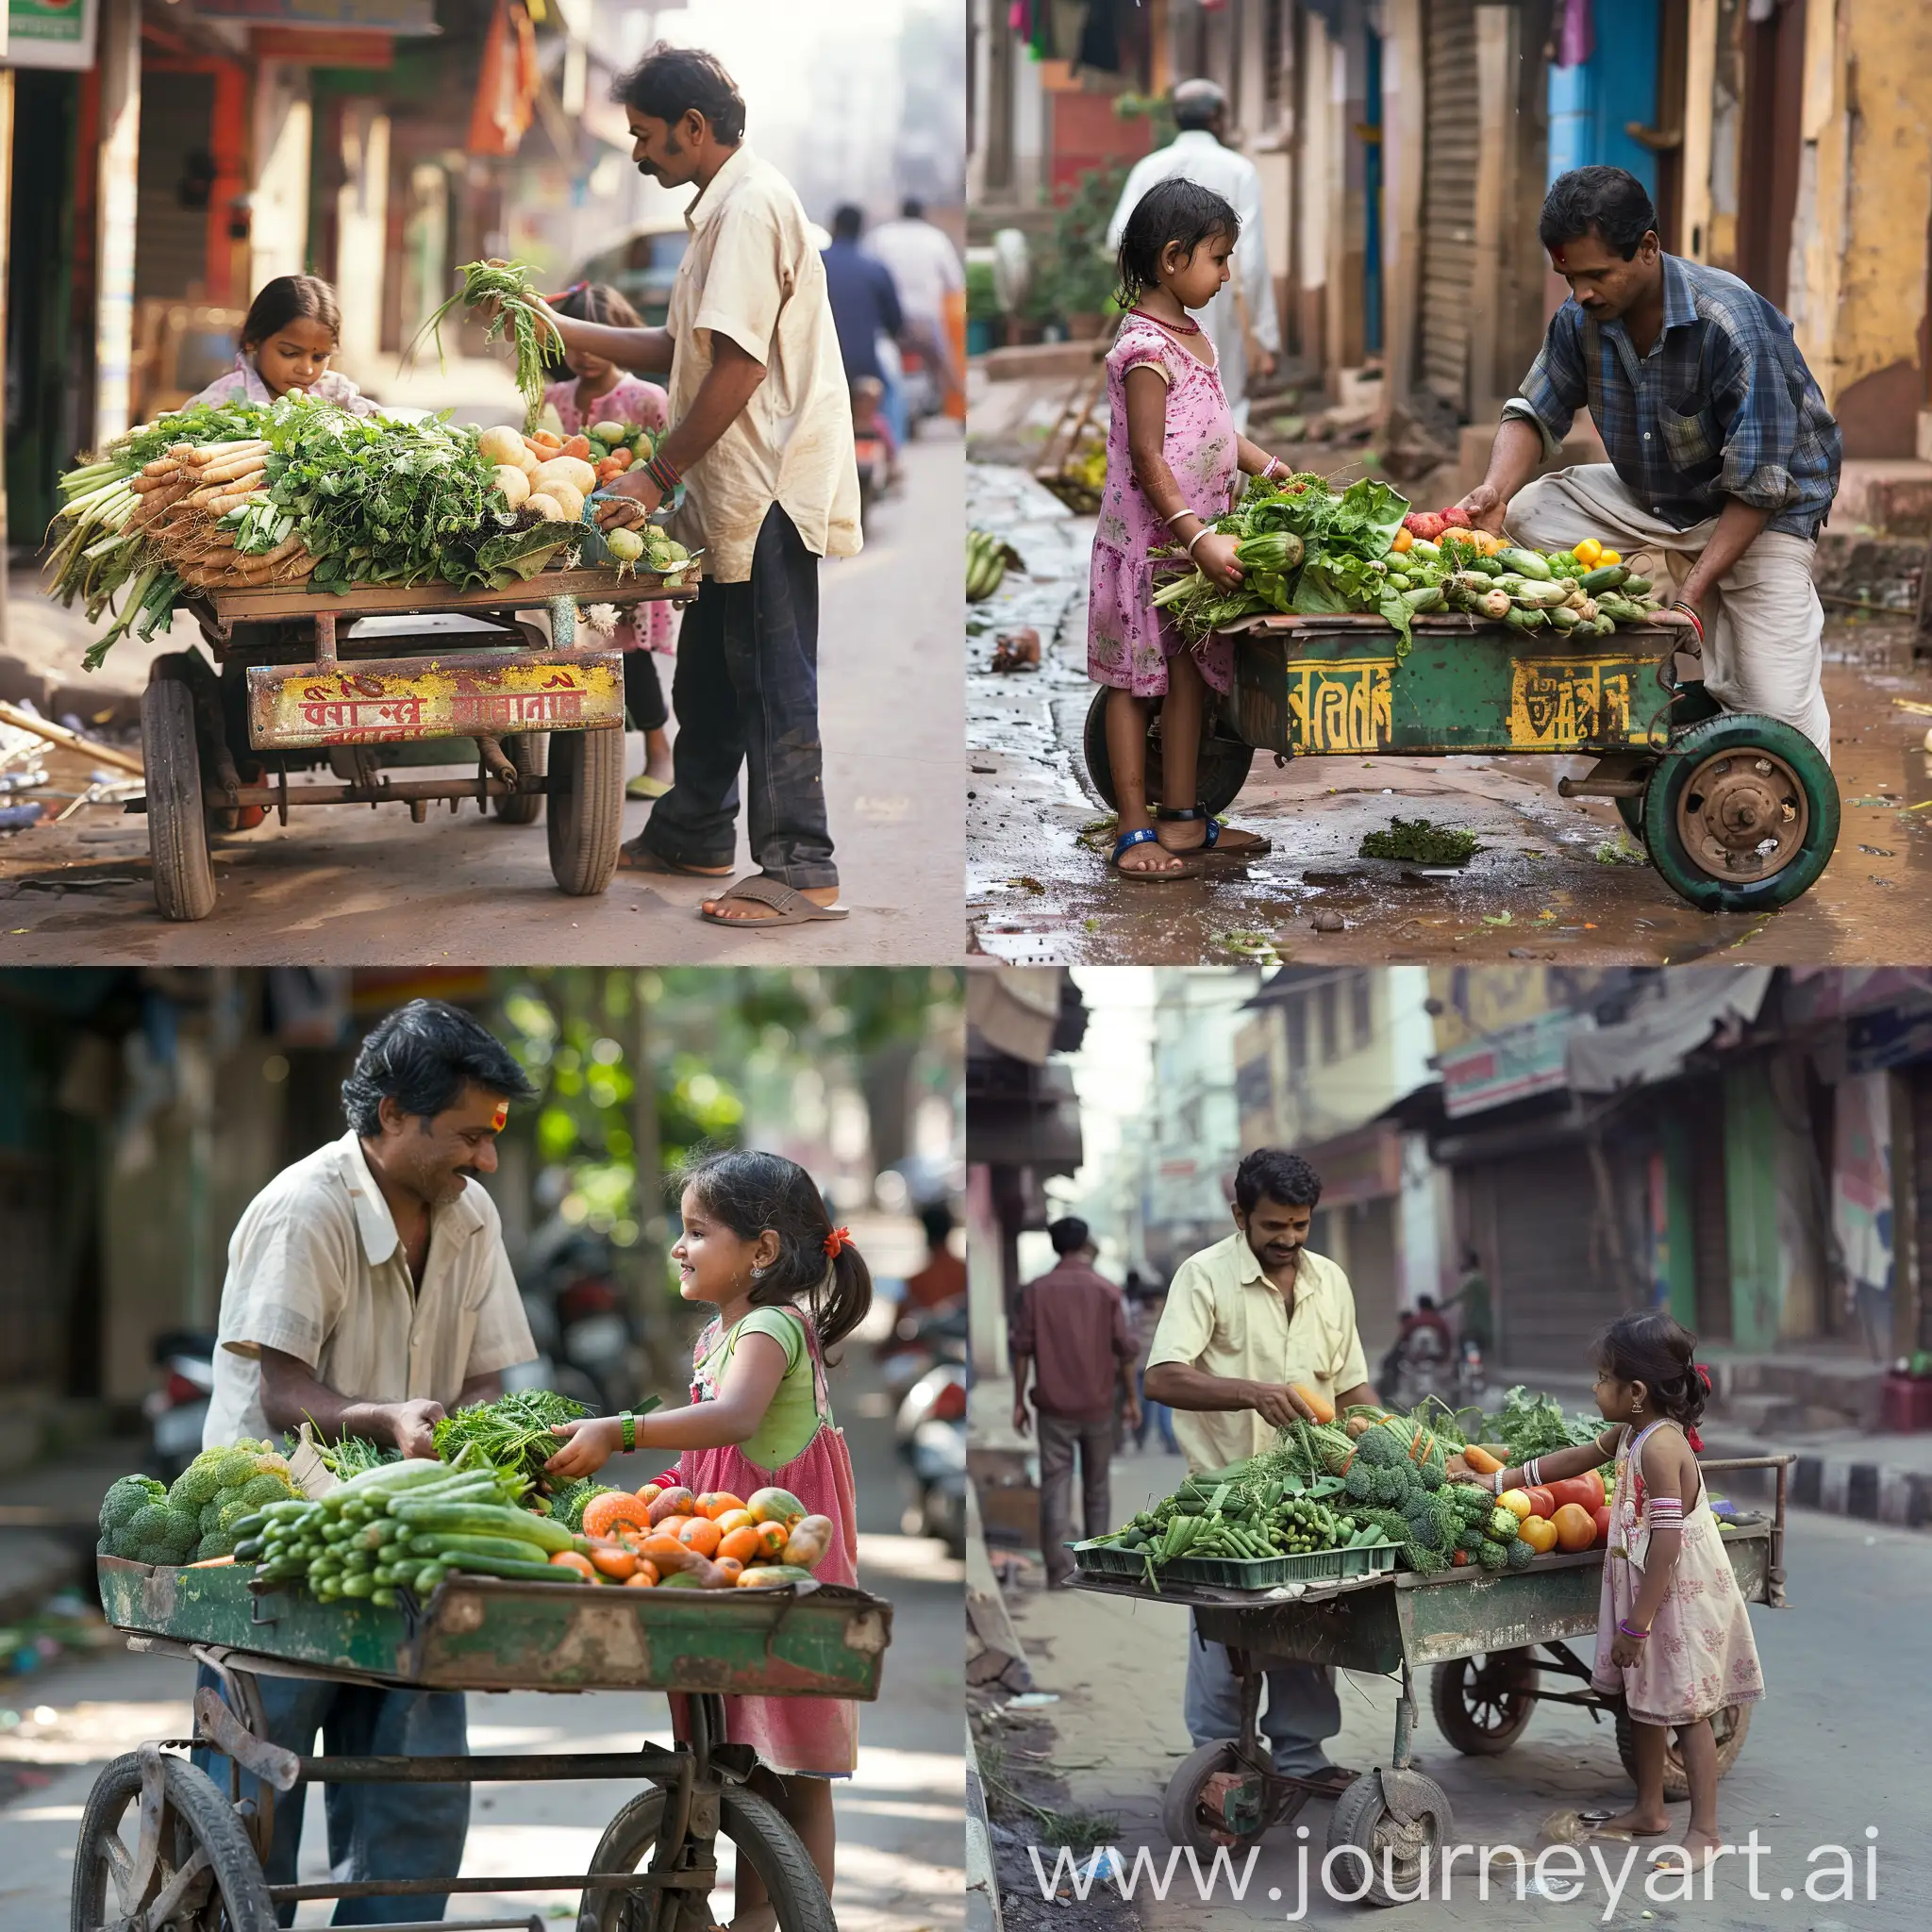 Indian-Girl-Child-Buying-Vegetables-from-a-Man-on-Vegetable-Cart